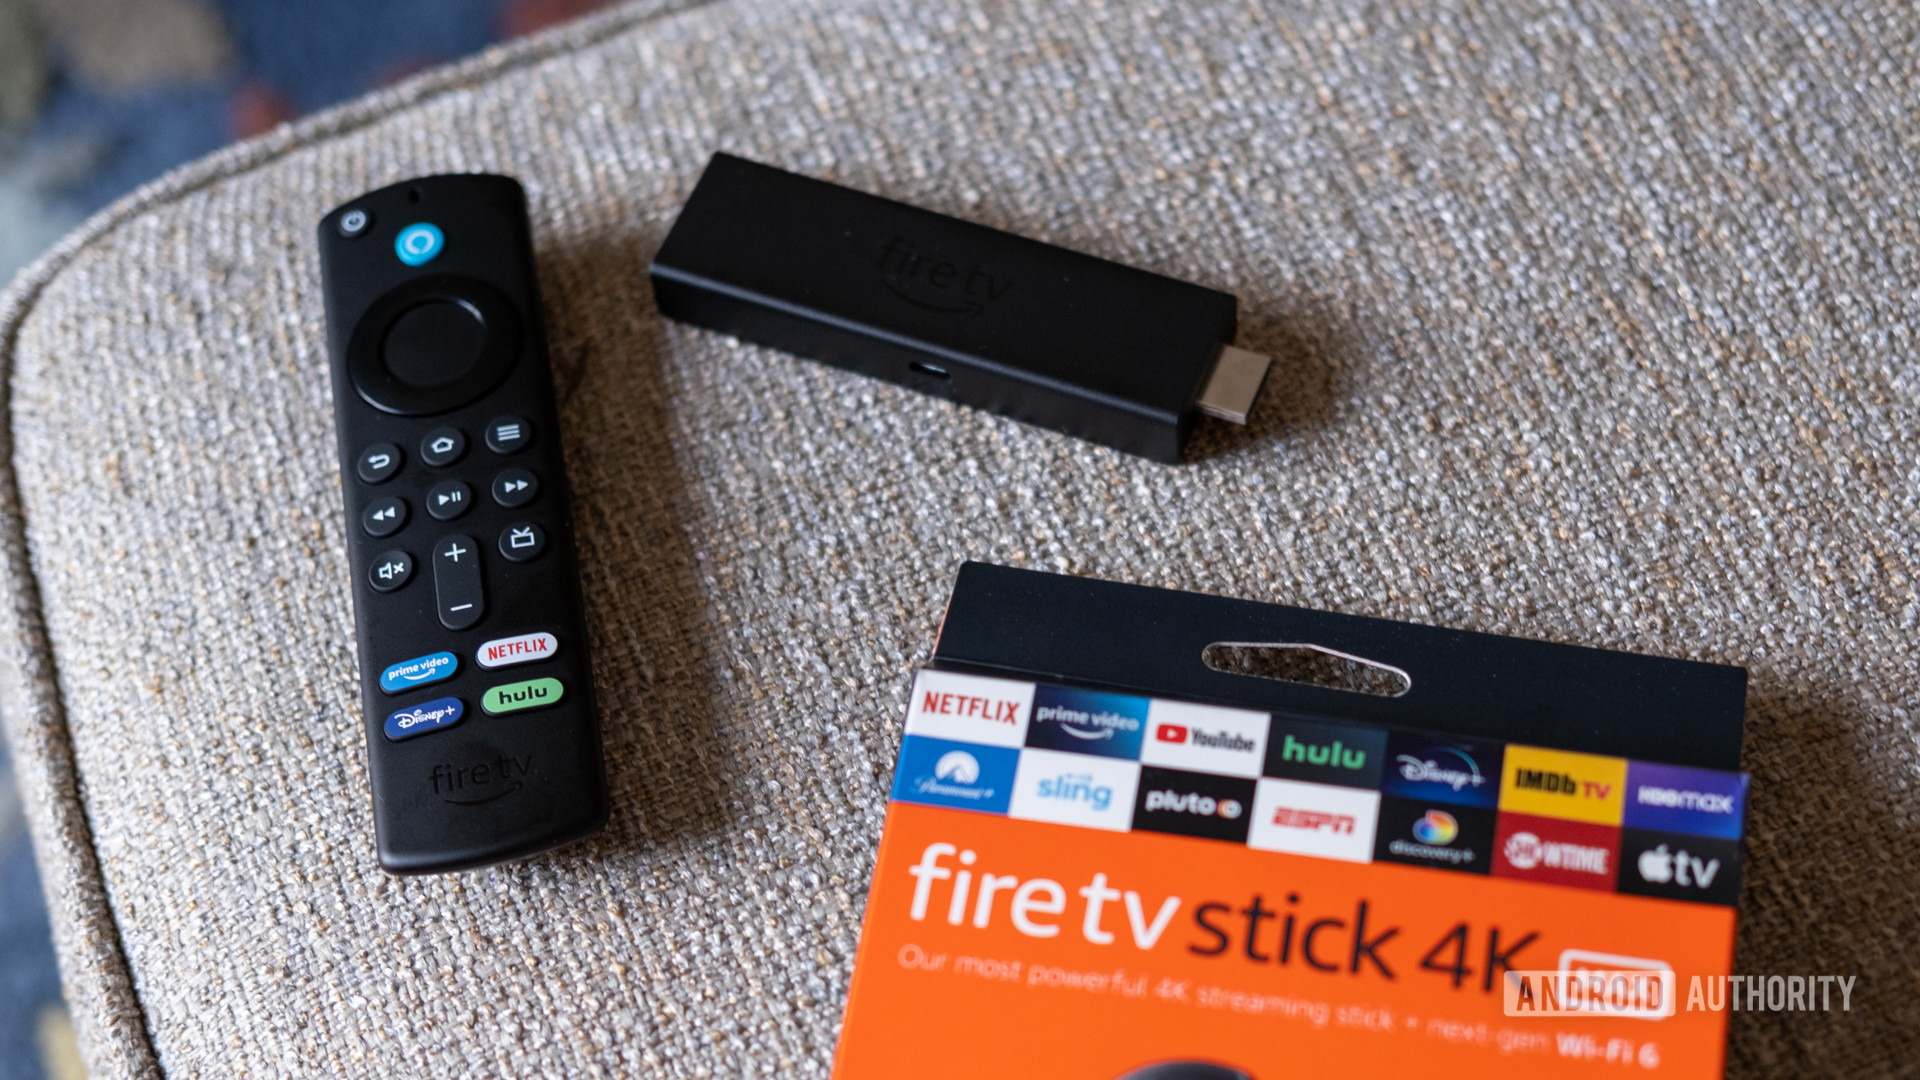 Fire TV Stick 4K Max remote and stick showing port